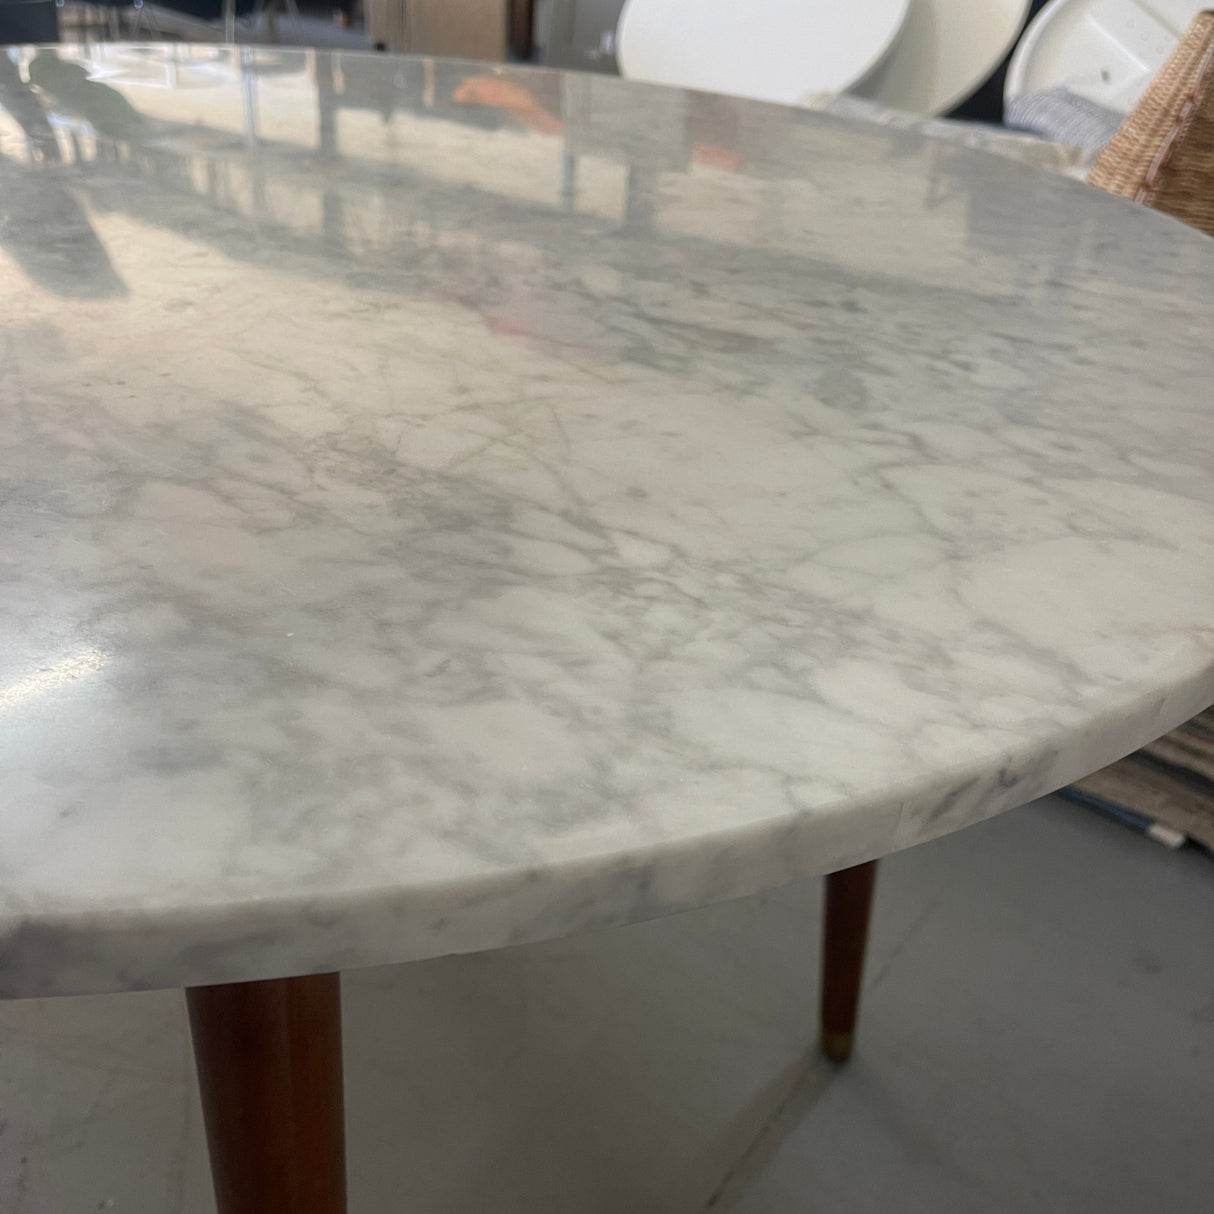 West Elm Reeve Marble Dining Table - enliven mart